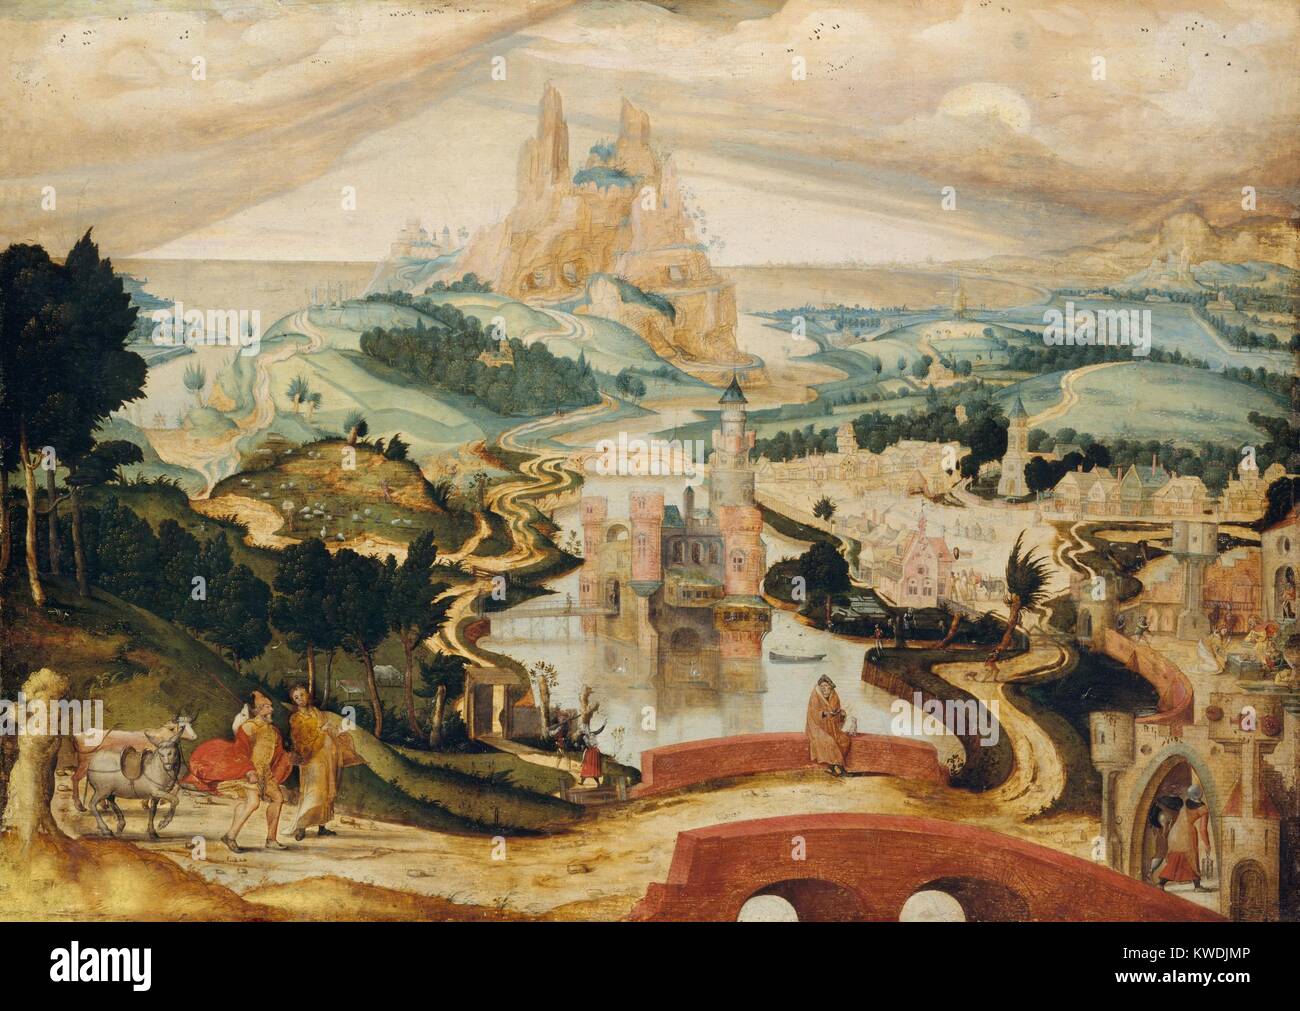 THE ARRIVAL IN BETHLEHEM, by Master LC, 1540, Netherlandish, Northern Renaissance oil painting. Three scenes within the painting narrate Mary and Joseph arrival (lower left), being turned away at an inn (right of the central castle), and in adoration of the Baby Jesus at far right. These actions takes place within a detail, complex, and unfinished landscape (BSLOC 2017 16 95) Stock Photo